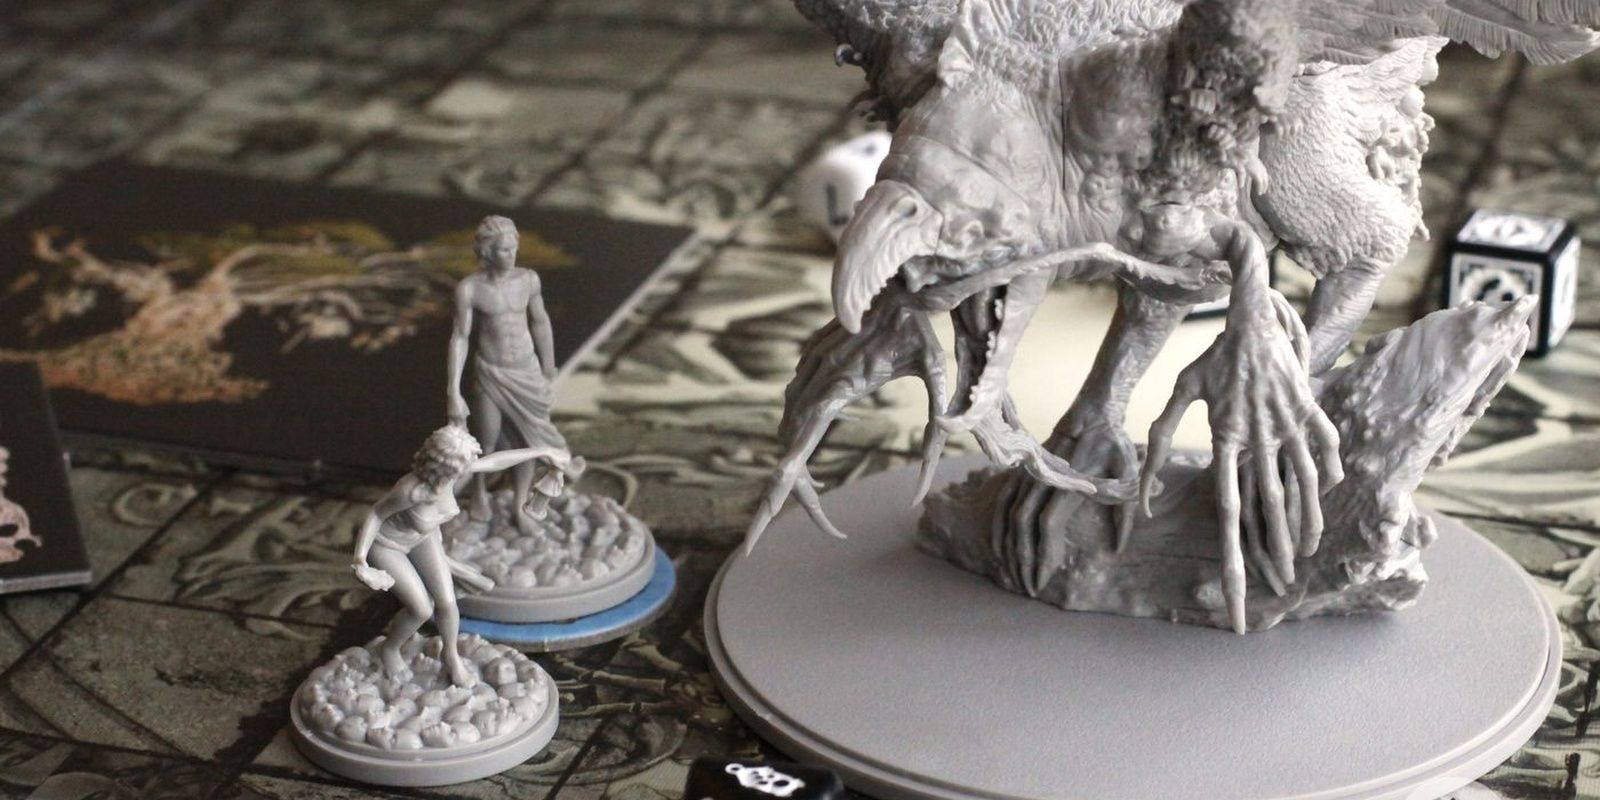 Two player characters and a monster in Kingdom Death: Monster board game.